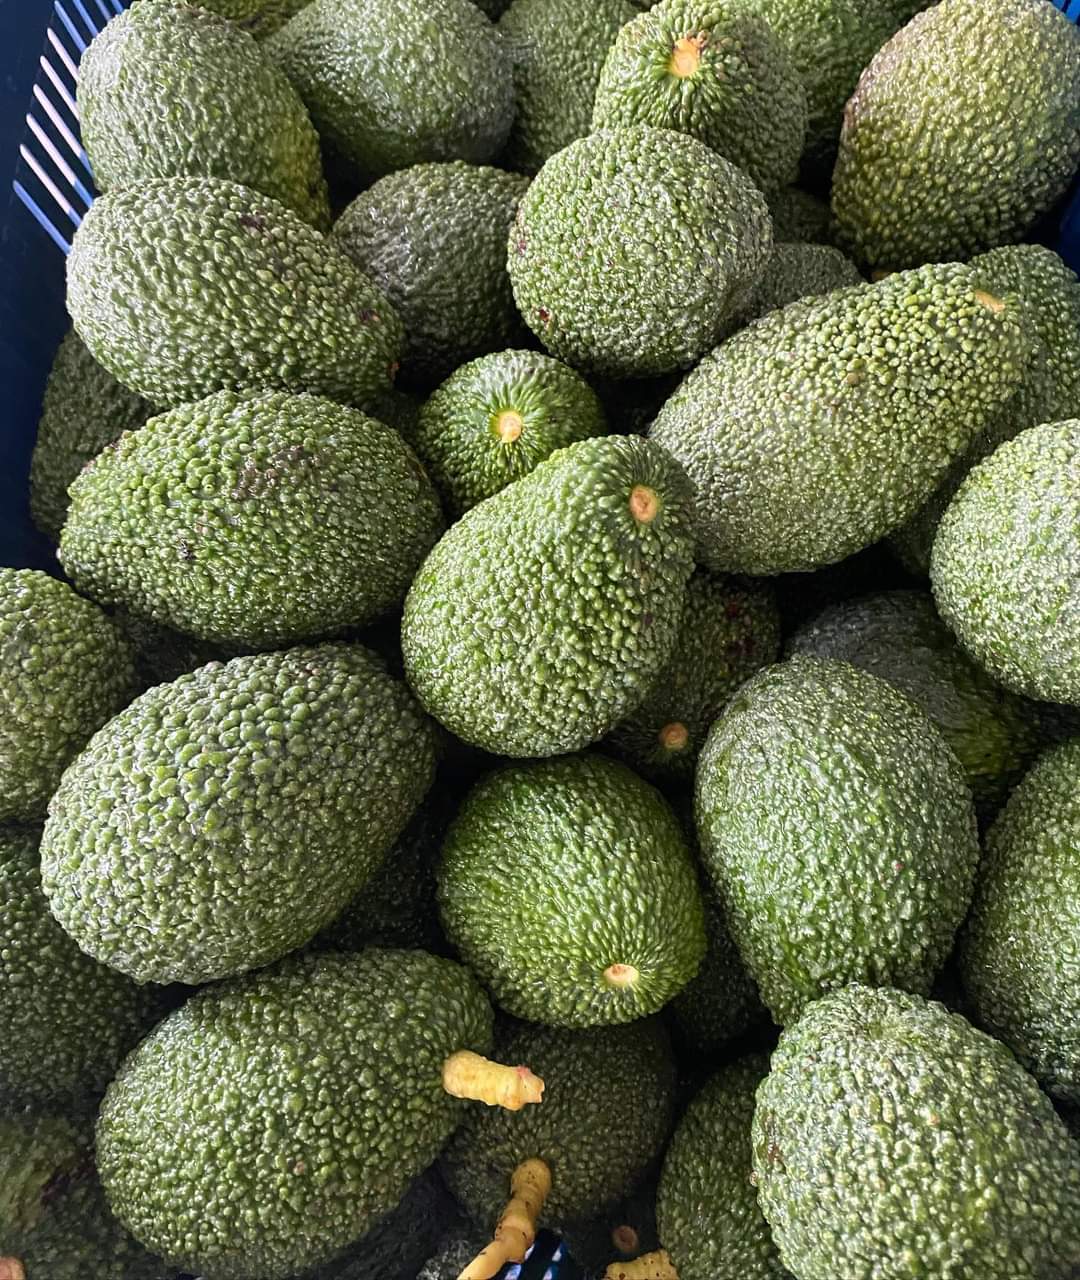 An expert view of avocado market and exclusive interview with industry expert as the season for hass avocados  begin in kenya